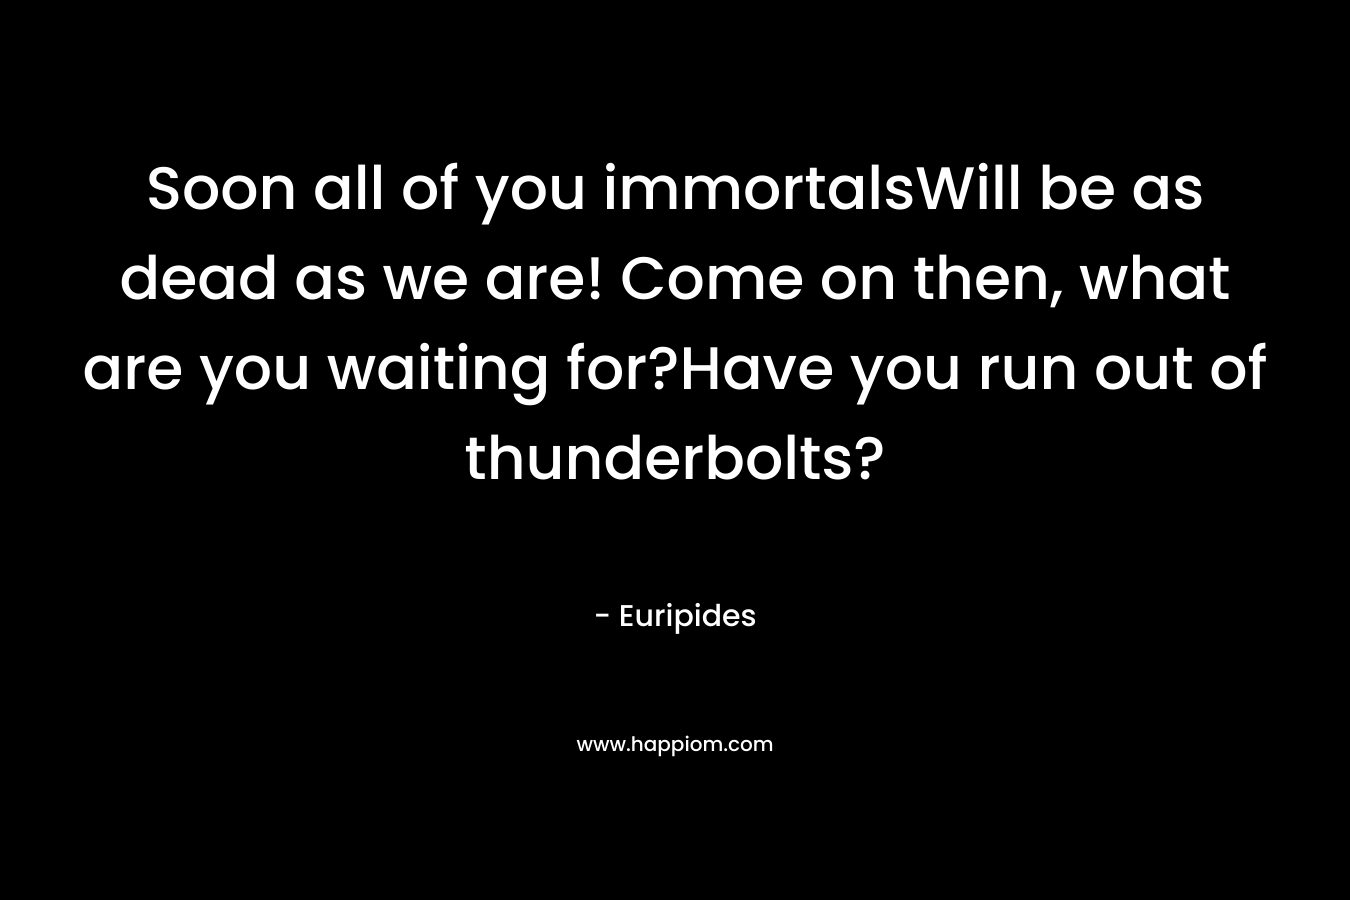 Soon all of you immortalsWill be as dead as we are! Come on then, what are you waiting for?Have you run out of thunderbolts? – Euripides